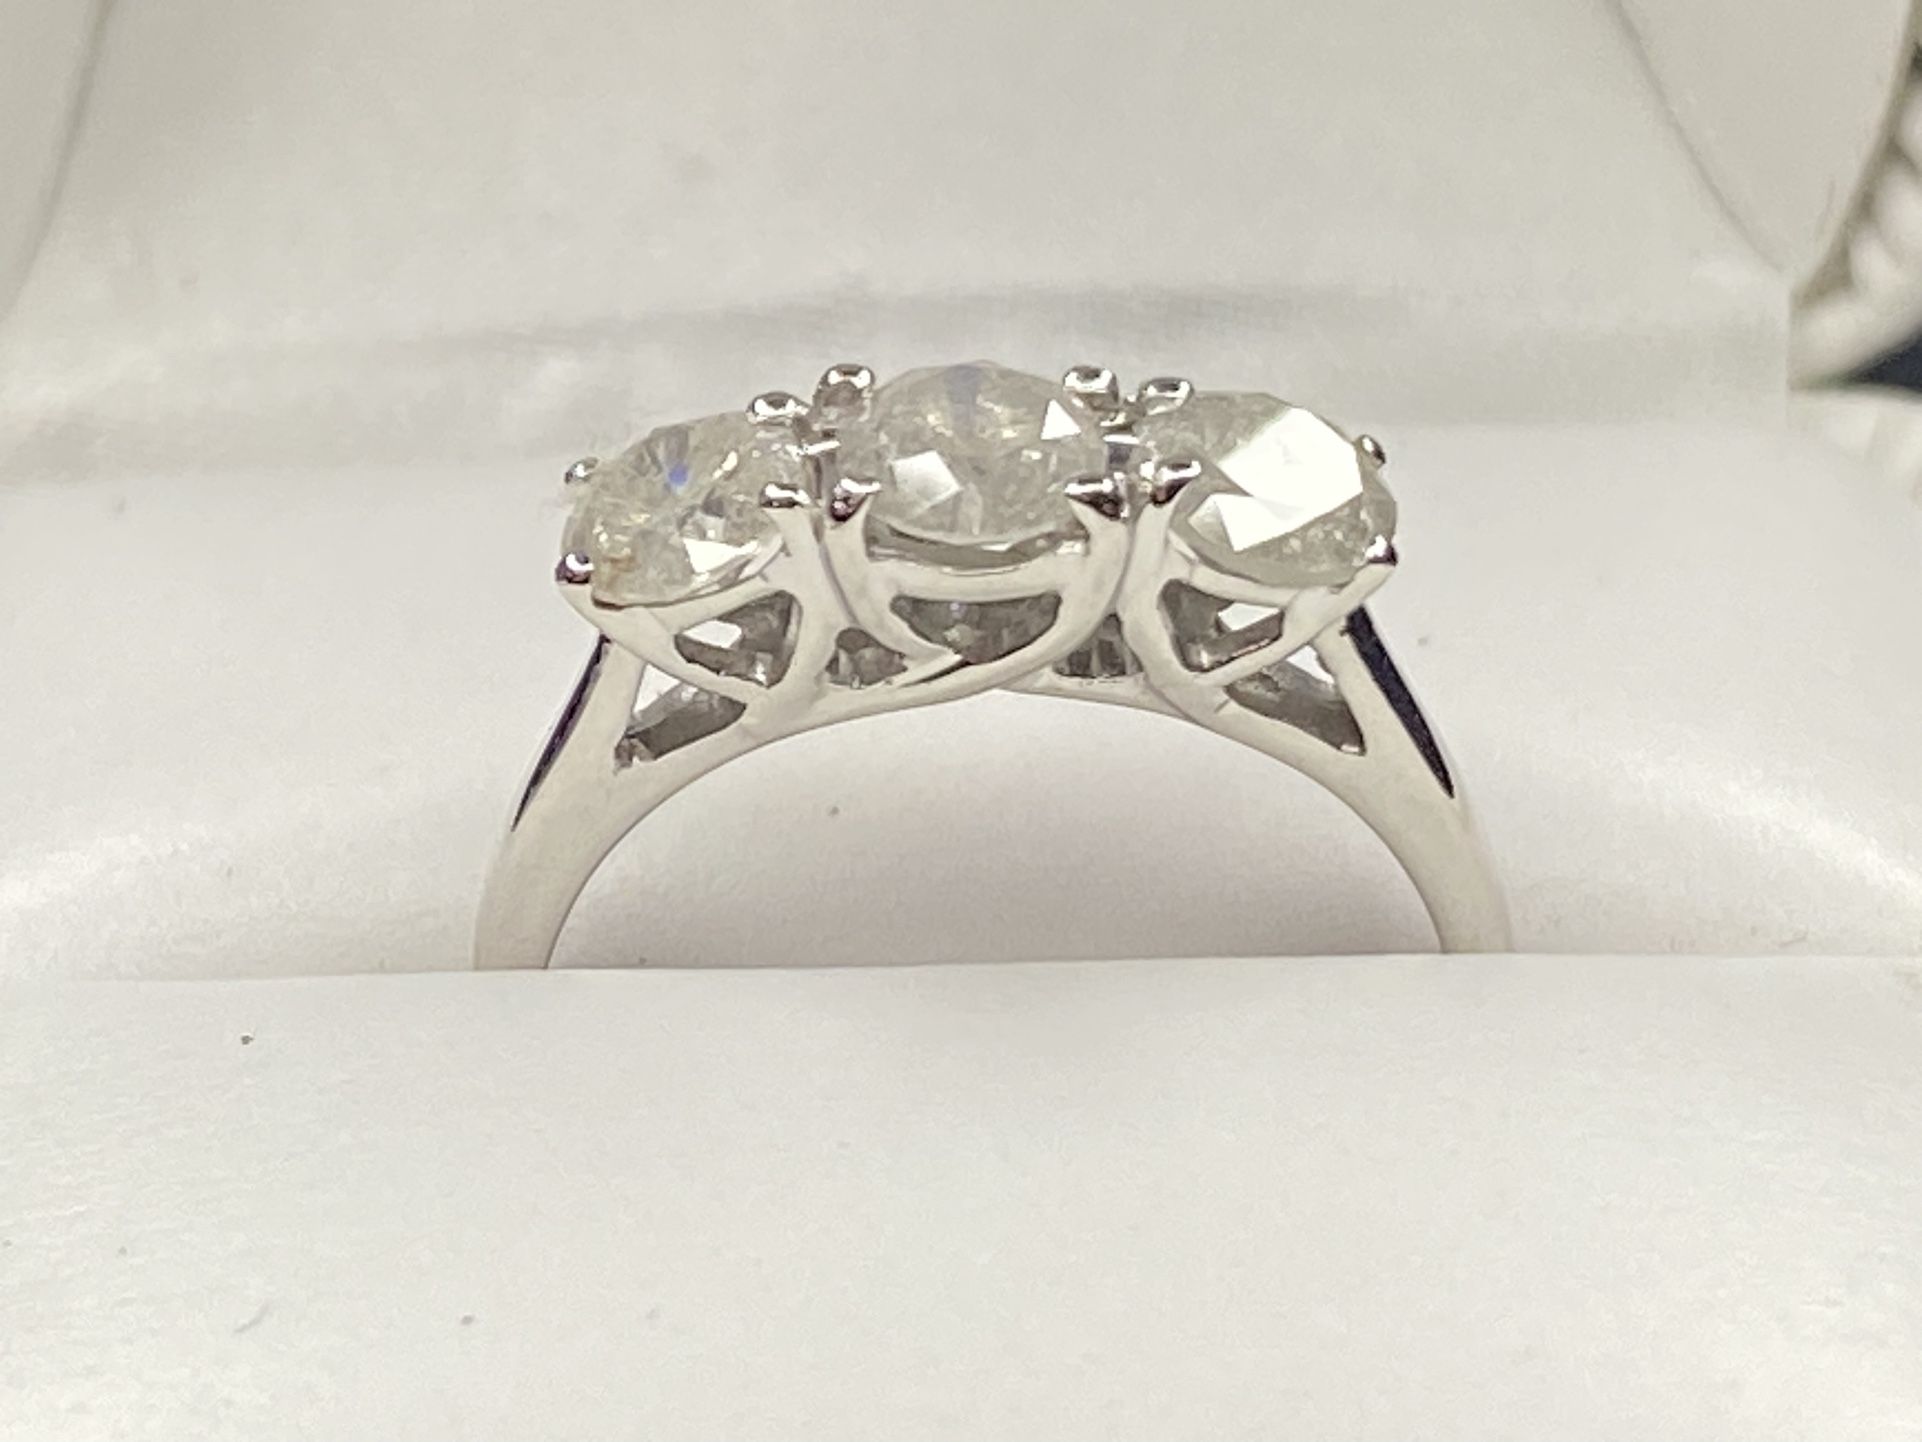 10kt White Gold 1.00 ct Round Brilliant Cut Diamond Ring - Size 6 - Appraisal Included